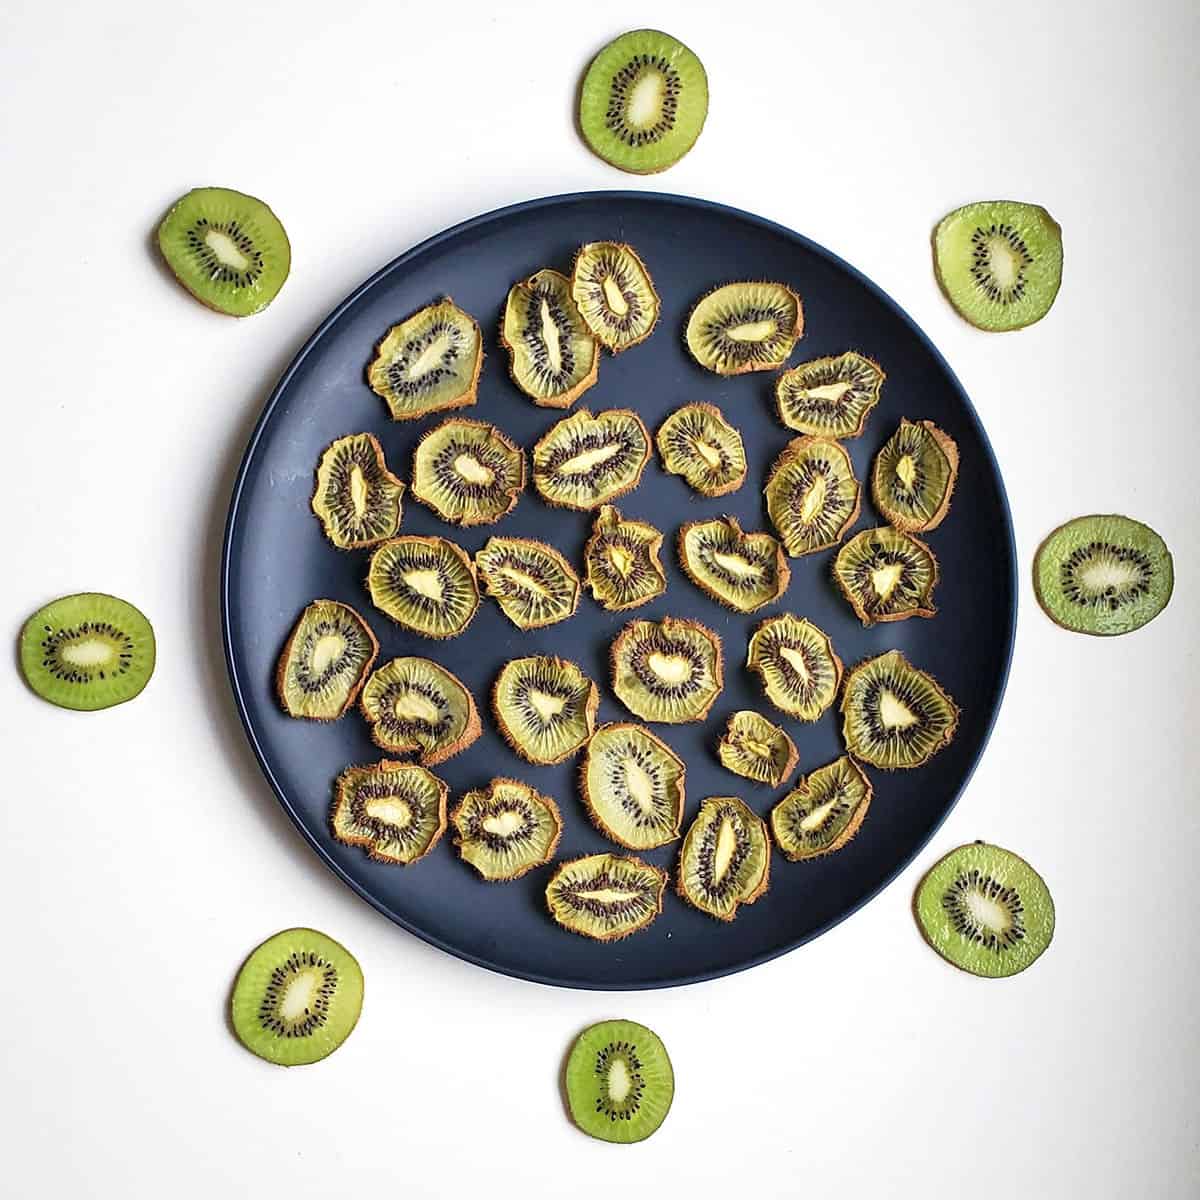 Finished-Dehydrated-Kiwis-on-a-plate